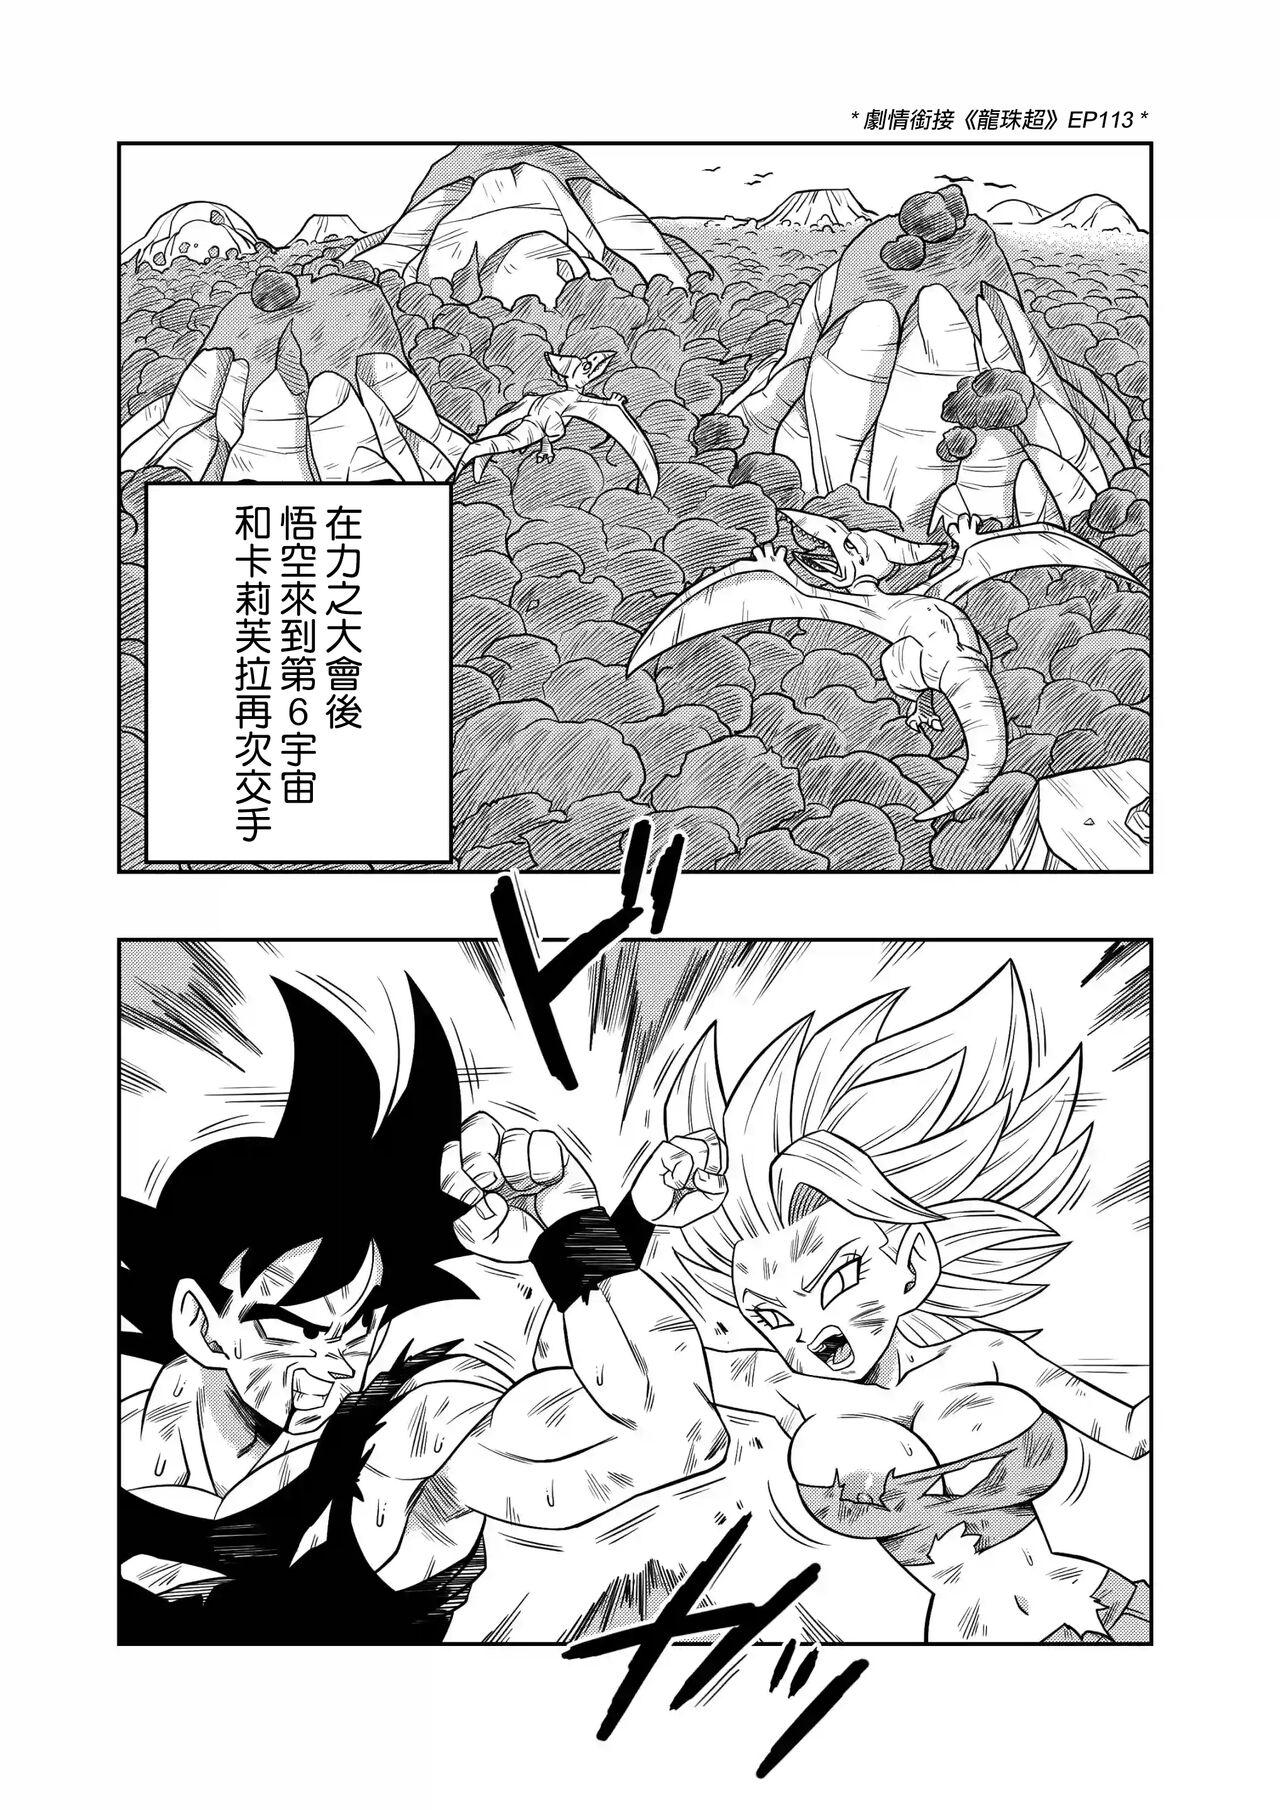 Wet Pussy Fight in the 6th Universe!!! - Dragon ball super Mas - Page 3